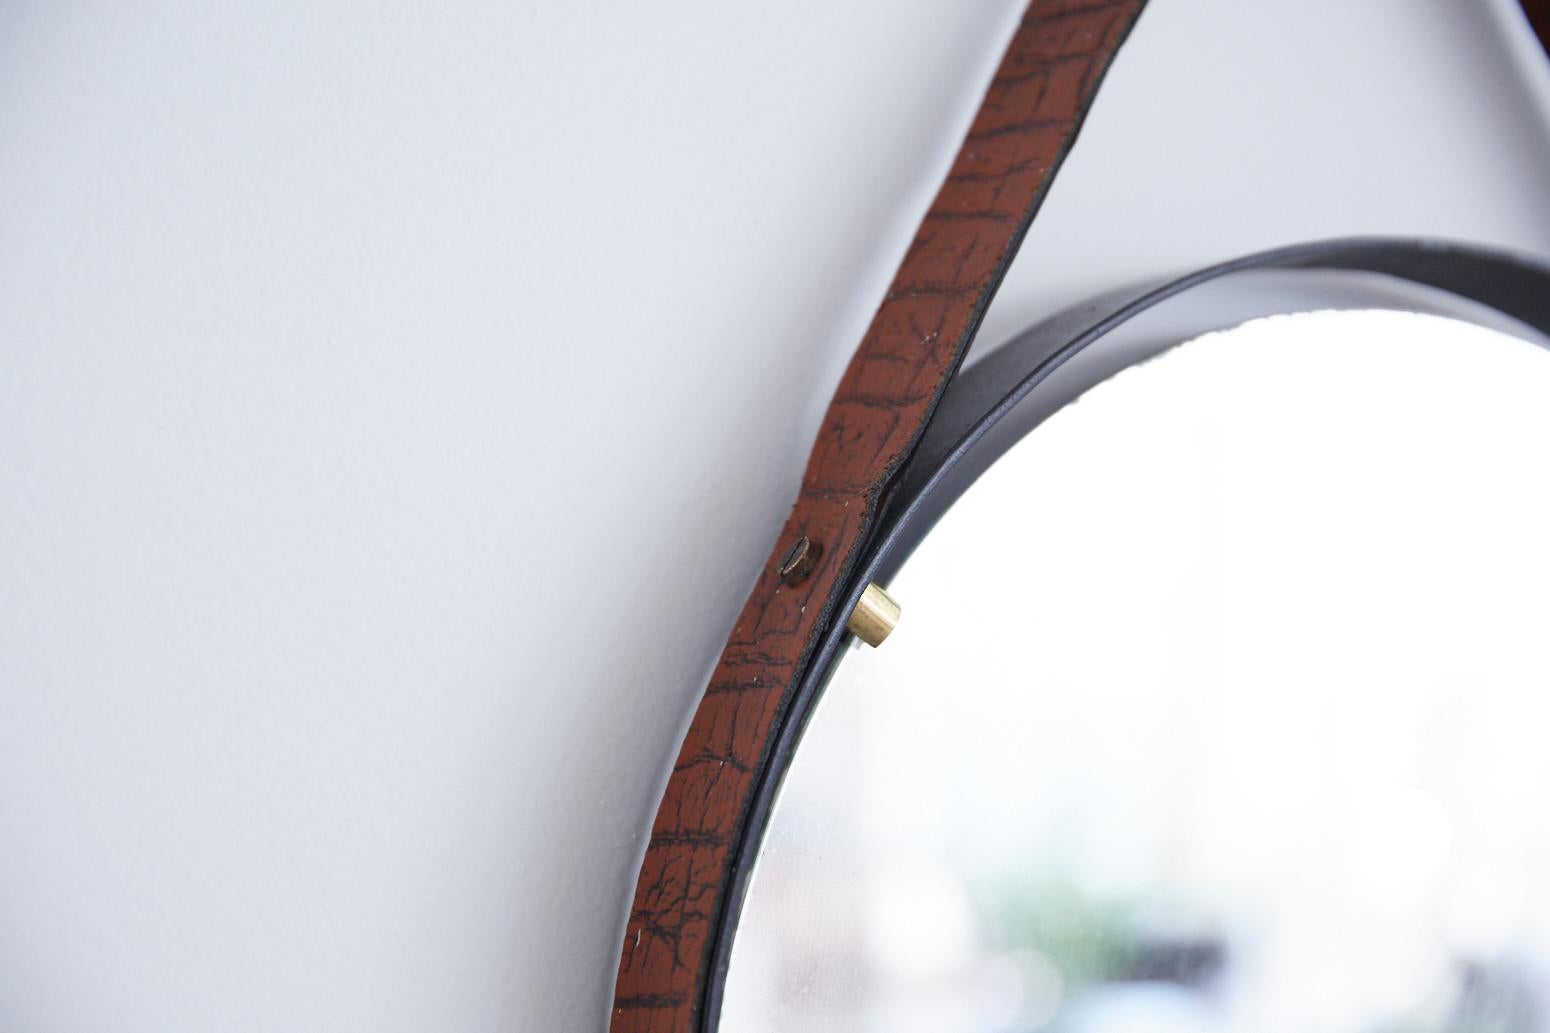 Beautiful circular Italian floating mirror from the 1970s. Round black iron frame holds floating mirror with brass pegs. Iron frame wrapped in textured brown leather with strap and metal stud detailing. Leather with slight cracking and mirror has